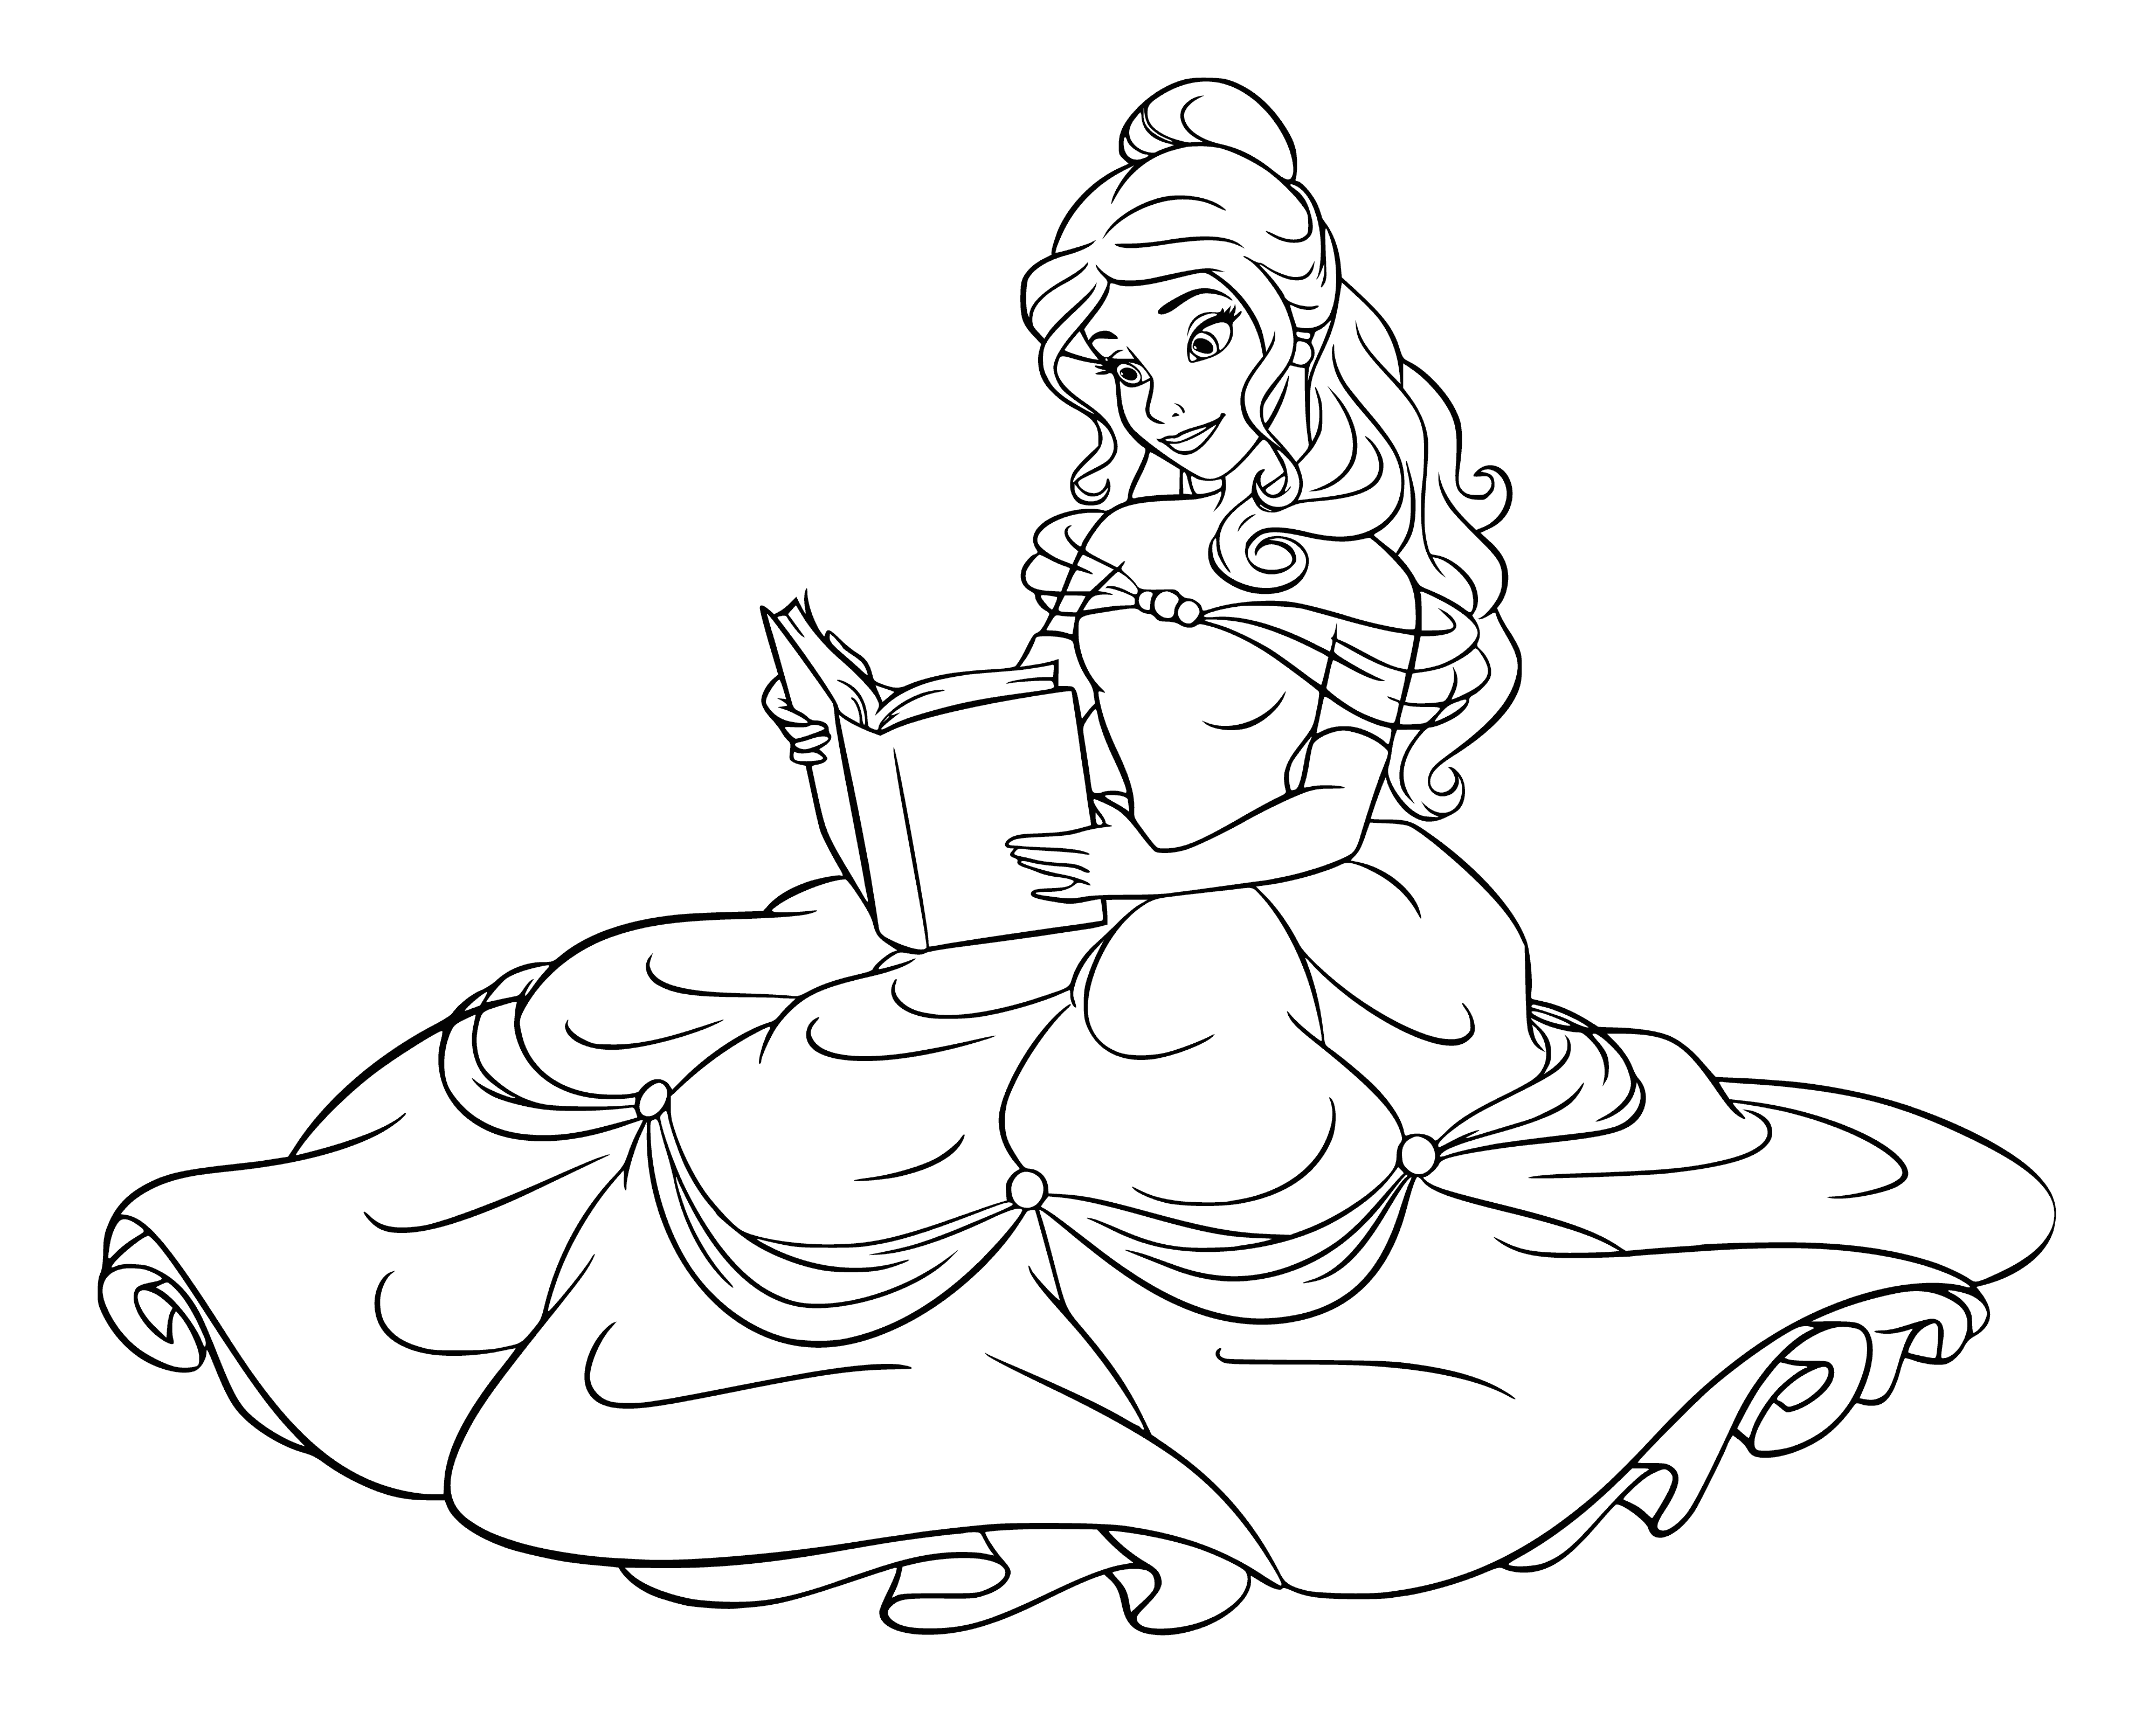 coloring page: Belle looks lost in thought, content & gentle as she reads in a yellow dress & white apron adorned with a rose.